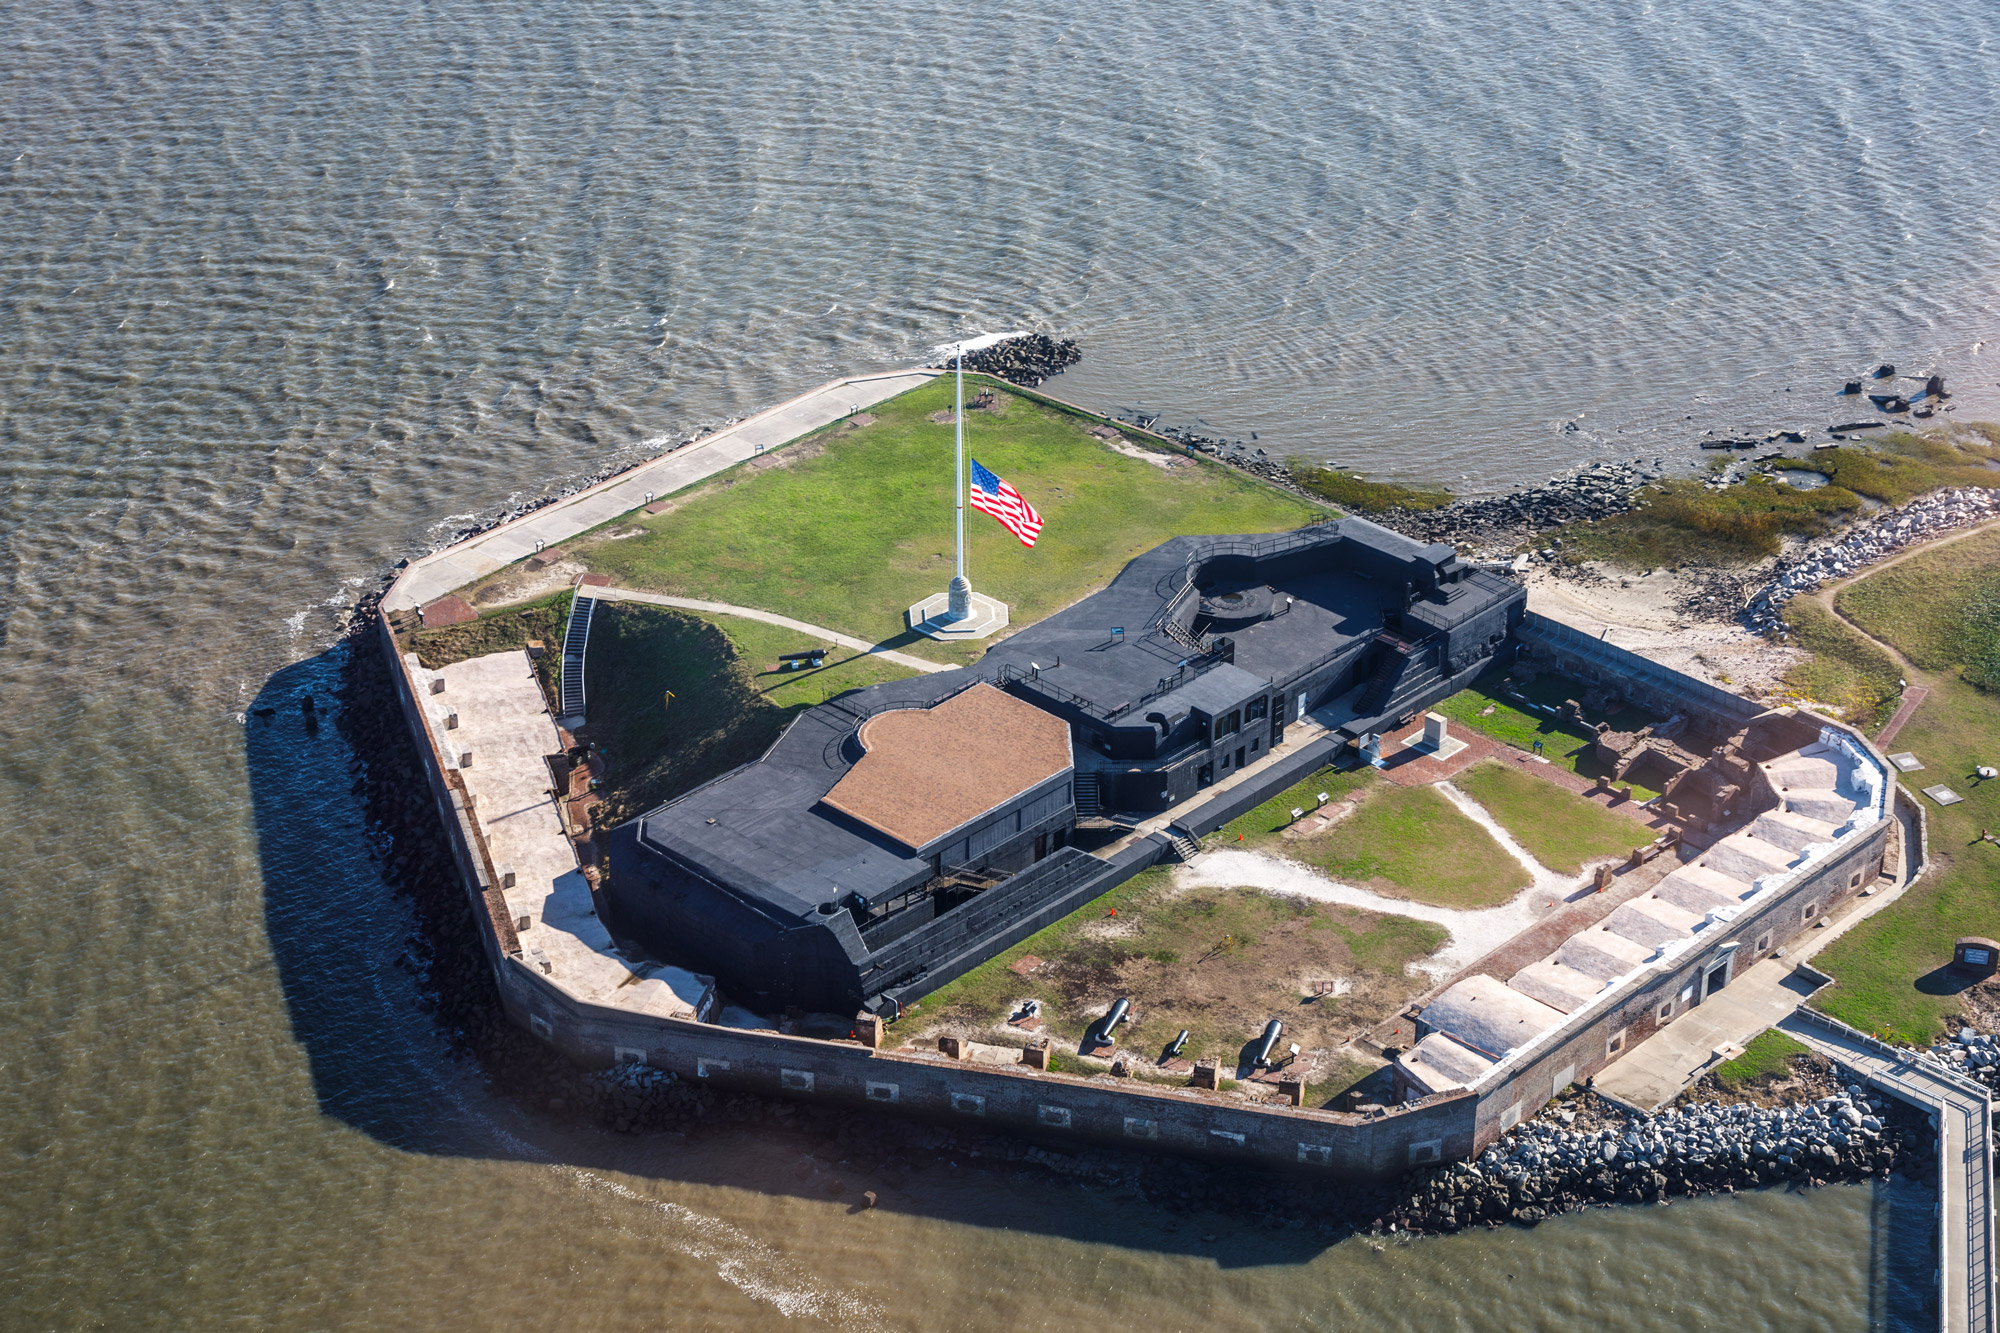 An aerial view of Fort Sumter, one of the great stops on these summer RV trips for families